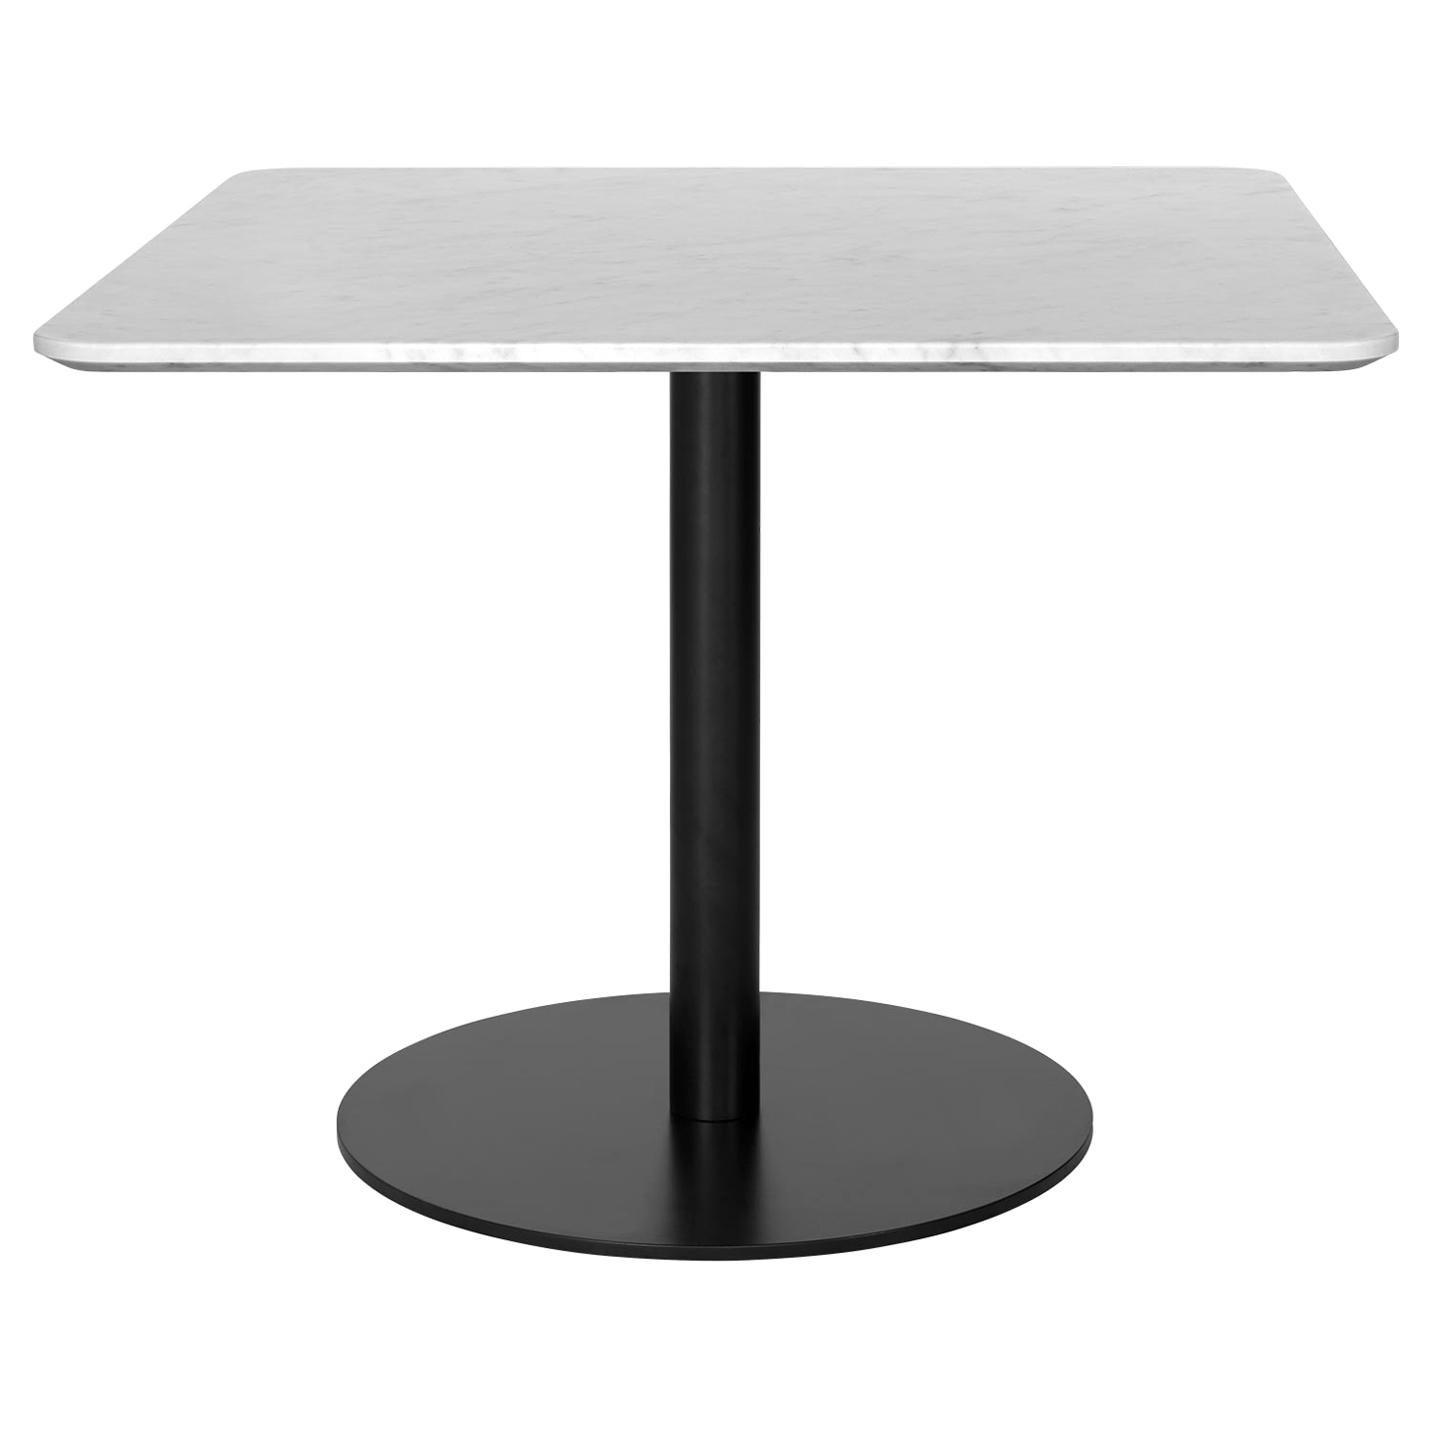 1.0 Lounge Table, Square, Round Black Base, Medium, Glass For Sale